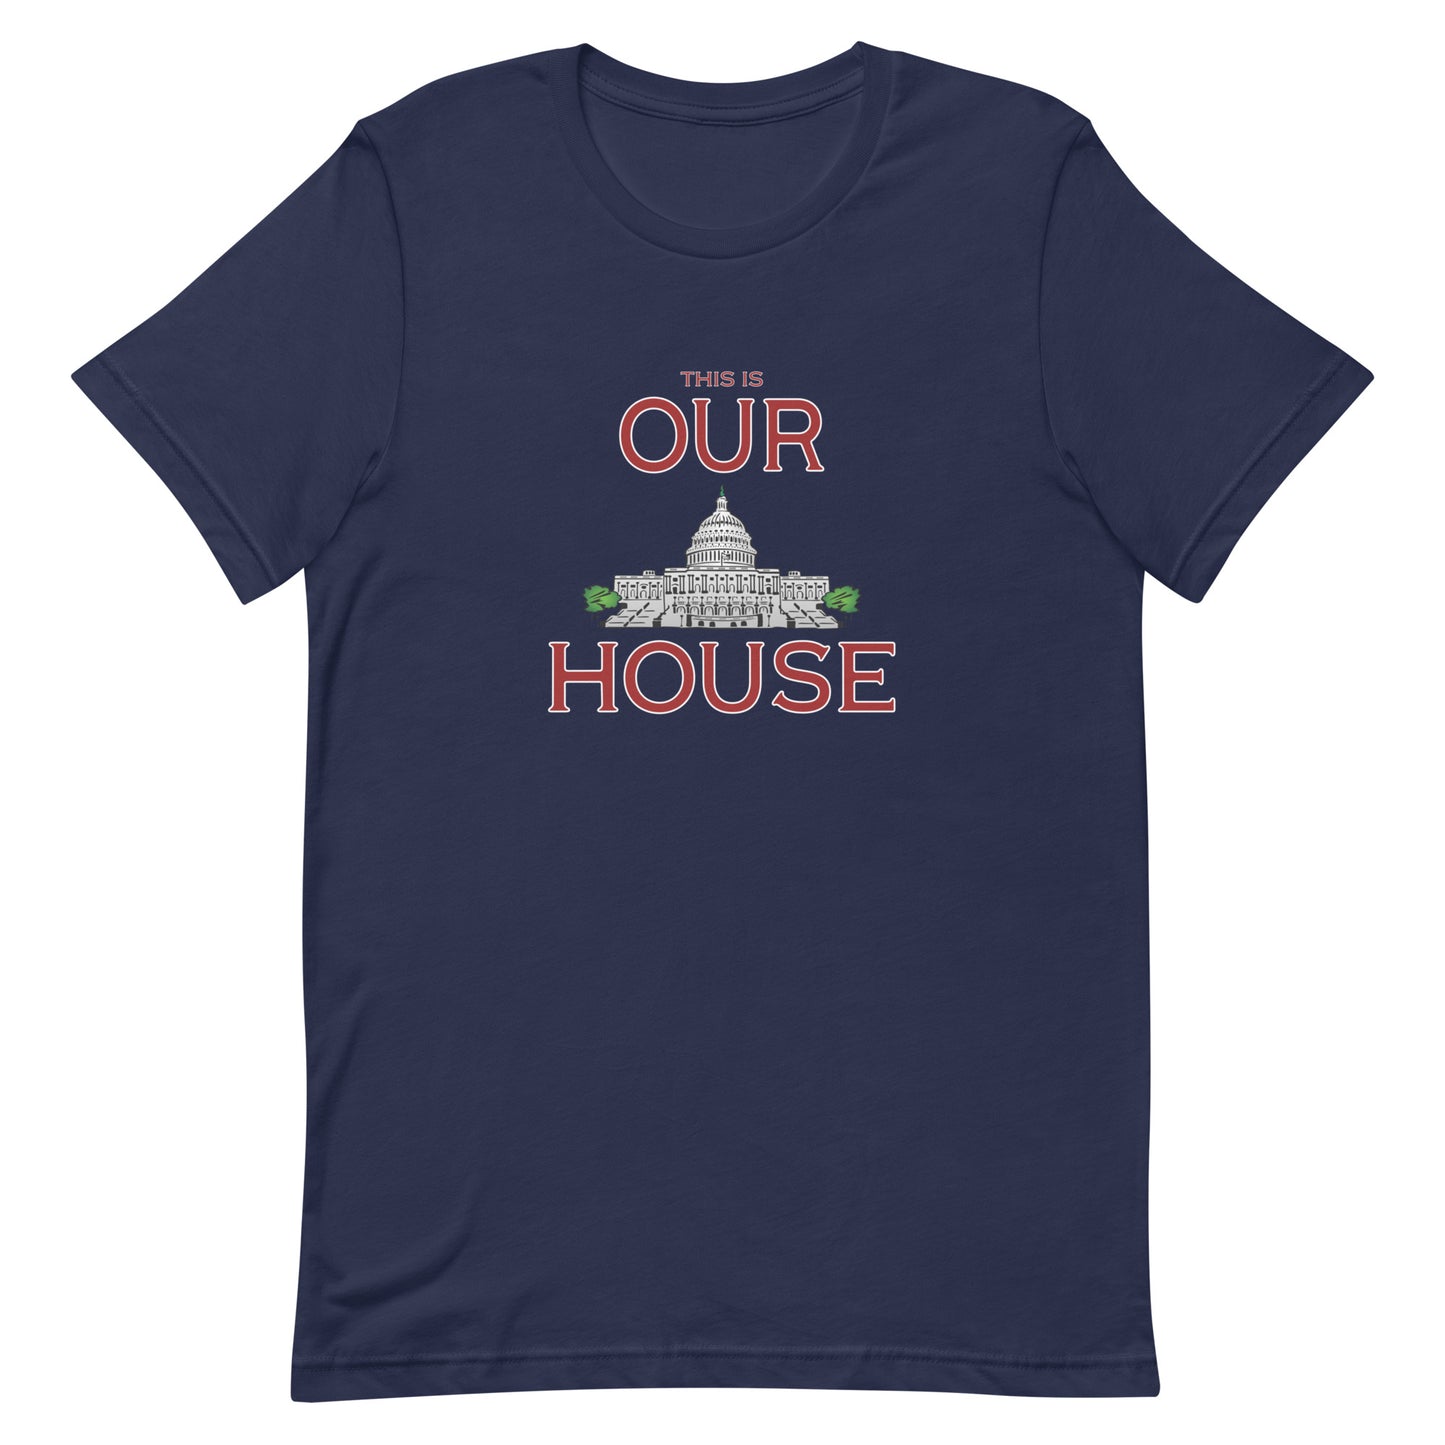 Our House T-shirt